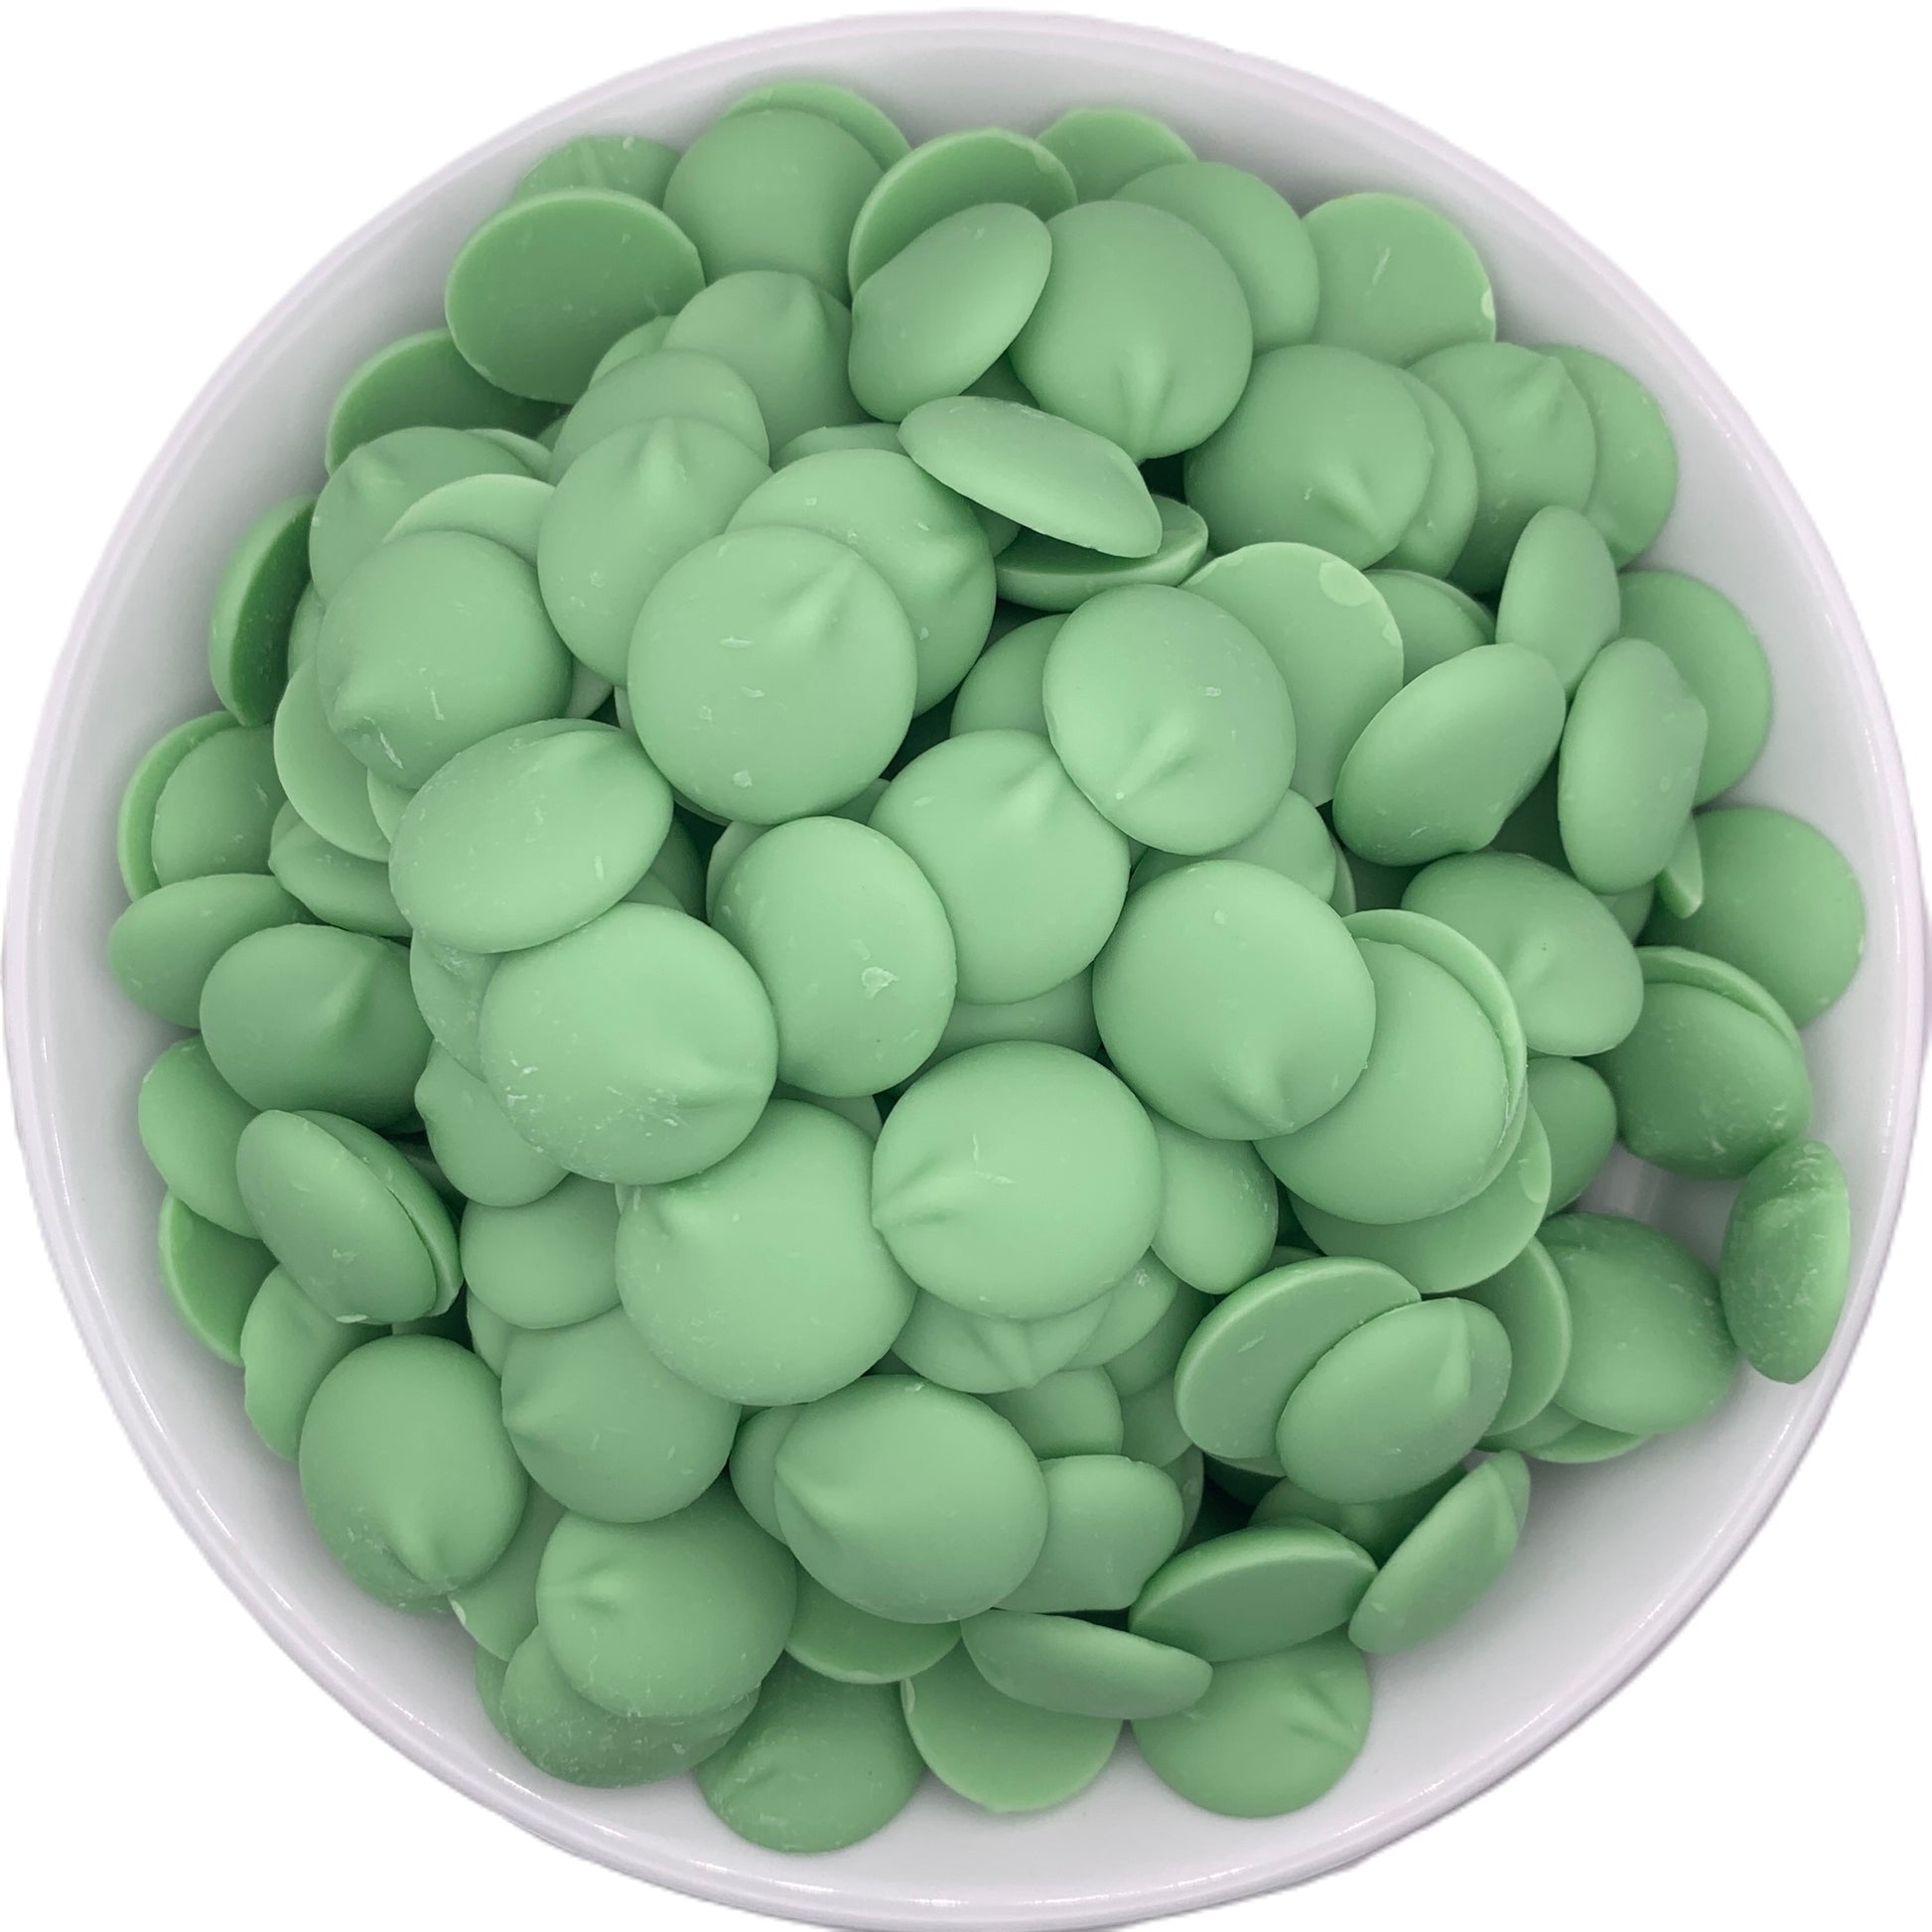 Top view of a white bowl filled with Merckens green chocolate melting wafers, the glossy green wafers neatly packed and ideal for custom candy making.